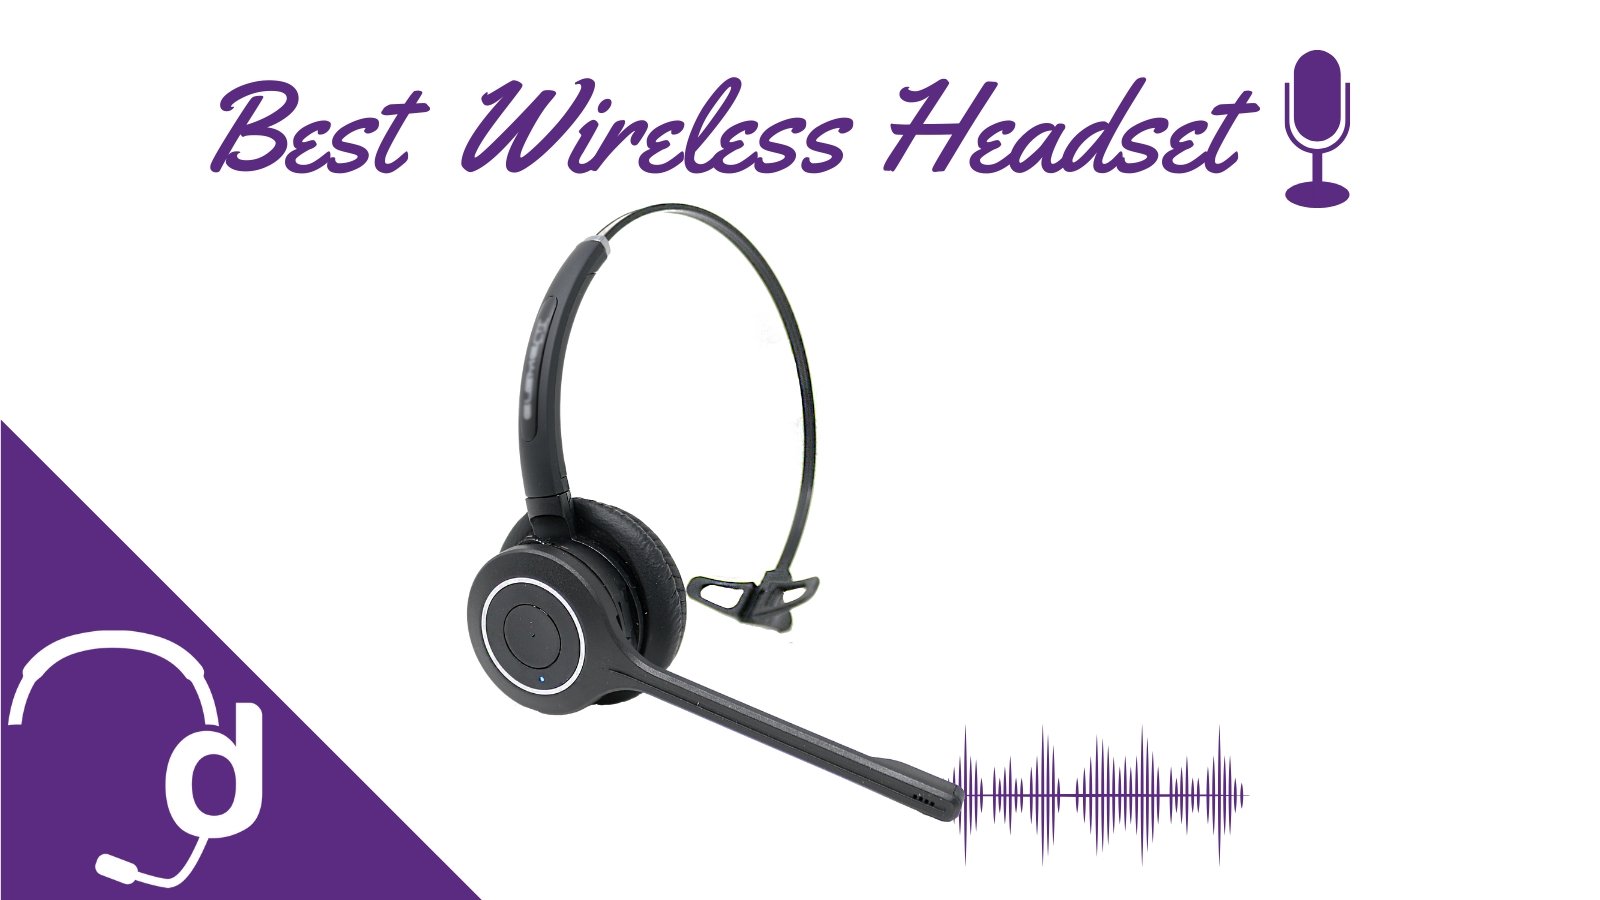 What is the Best Wireless Headset Microphone? - Headset Advisor